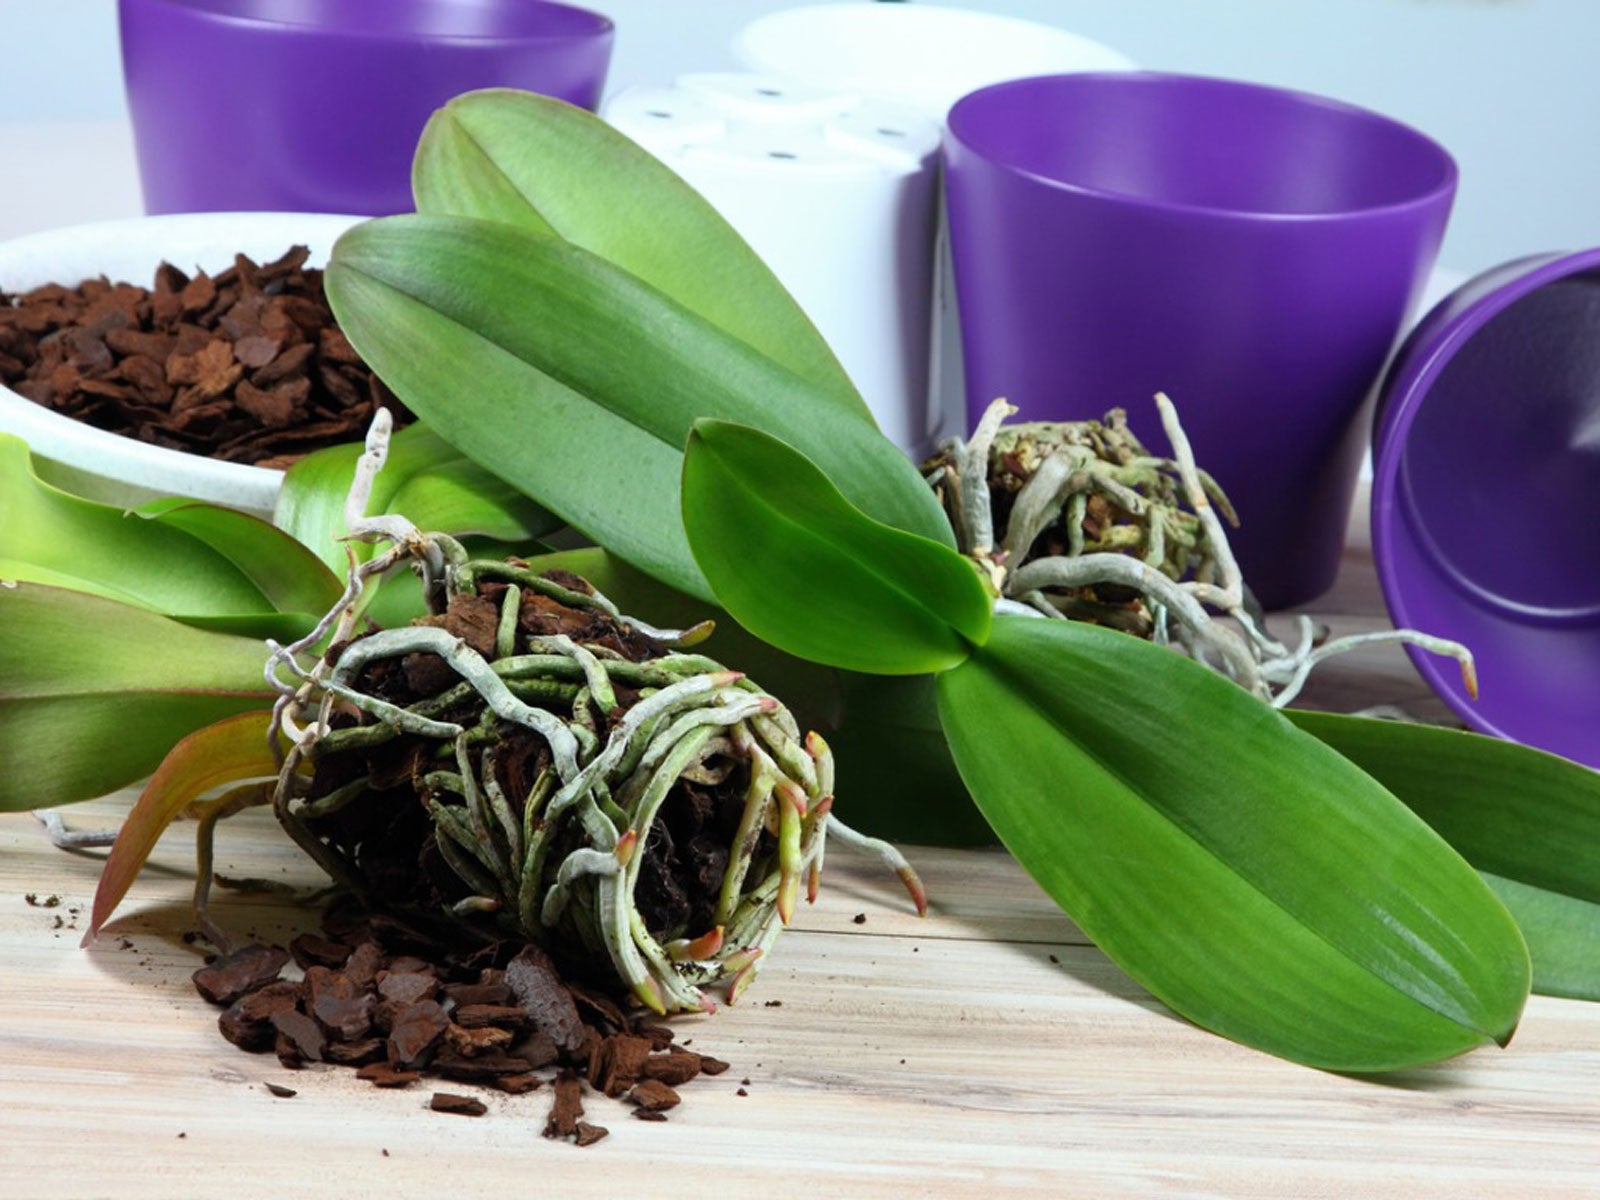 Orchid Potting Mix - Types Of Planting Mediums For Orchids